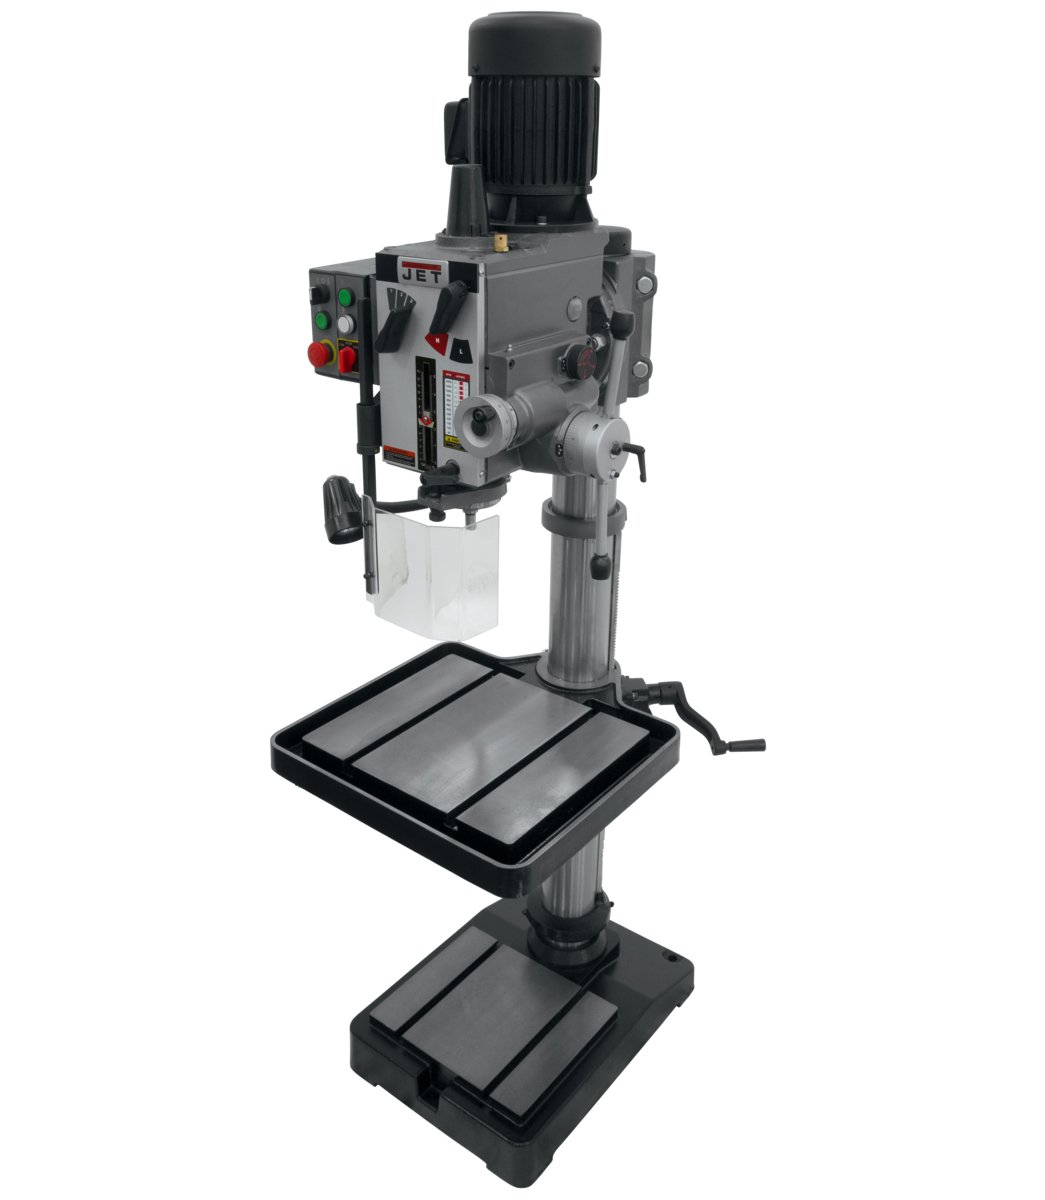 20" Geared Head Tapping Drill Press with Power Downfeed - 230V | GHD-20PFT - Diamond Tool Store